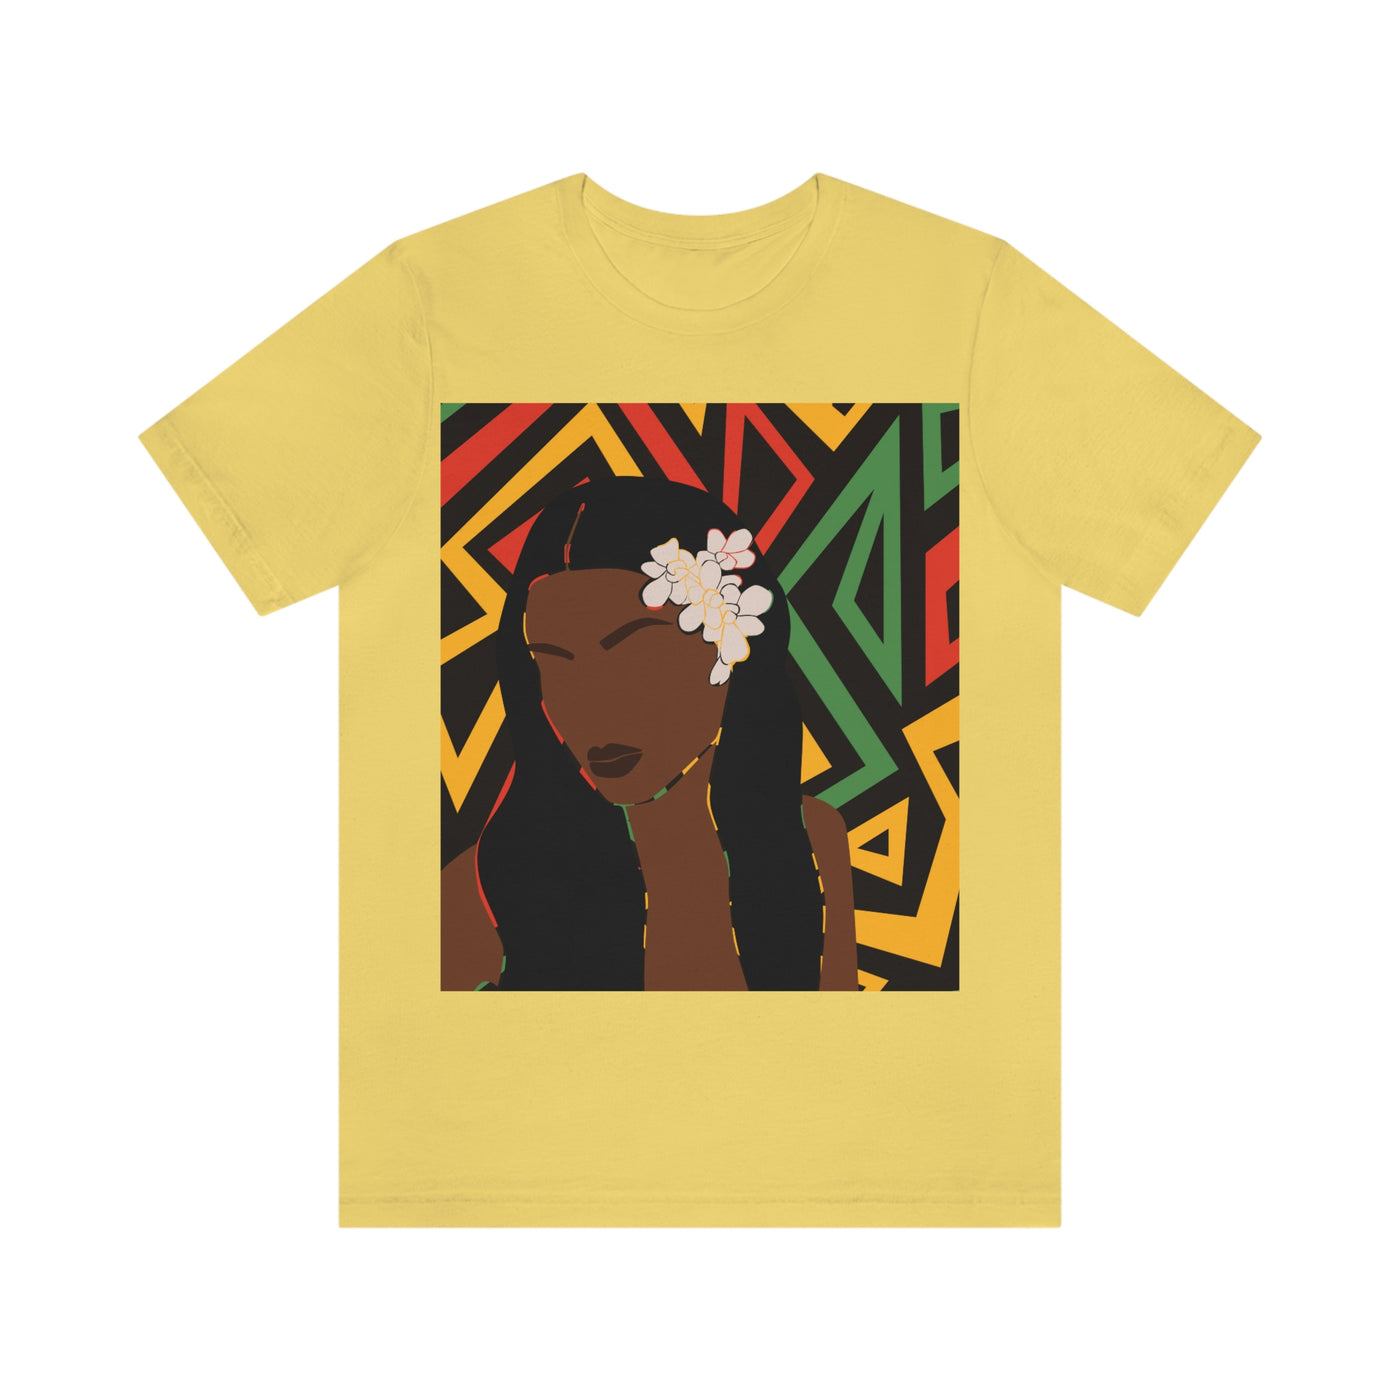 Long Haired Black Woman African Cotton Unisex Tee